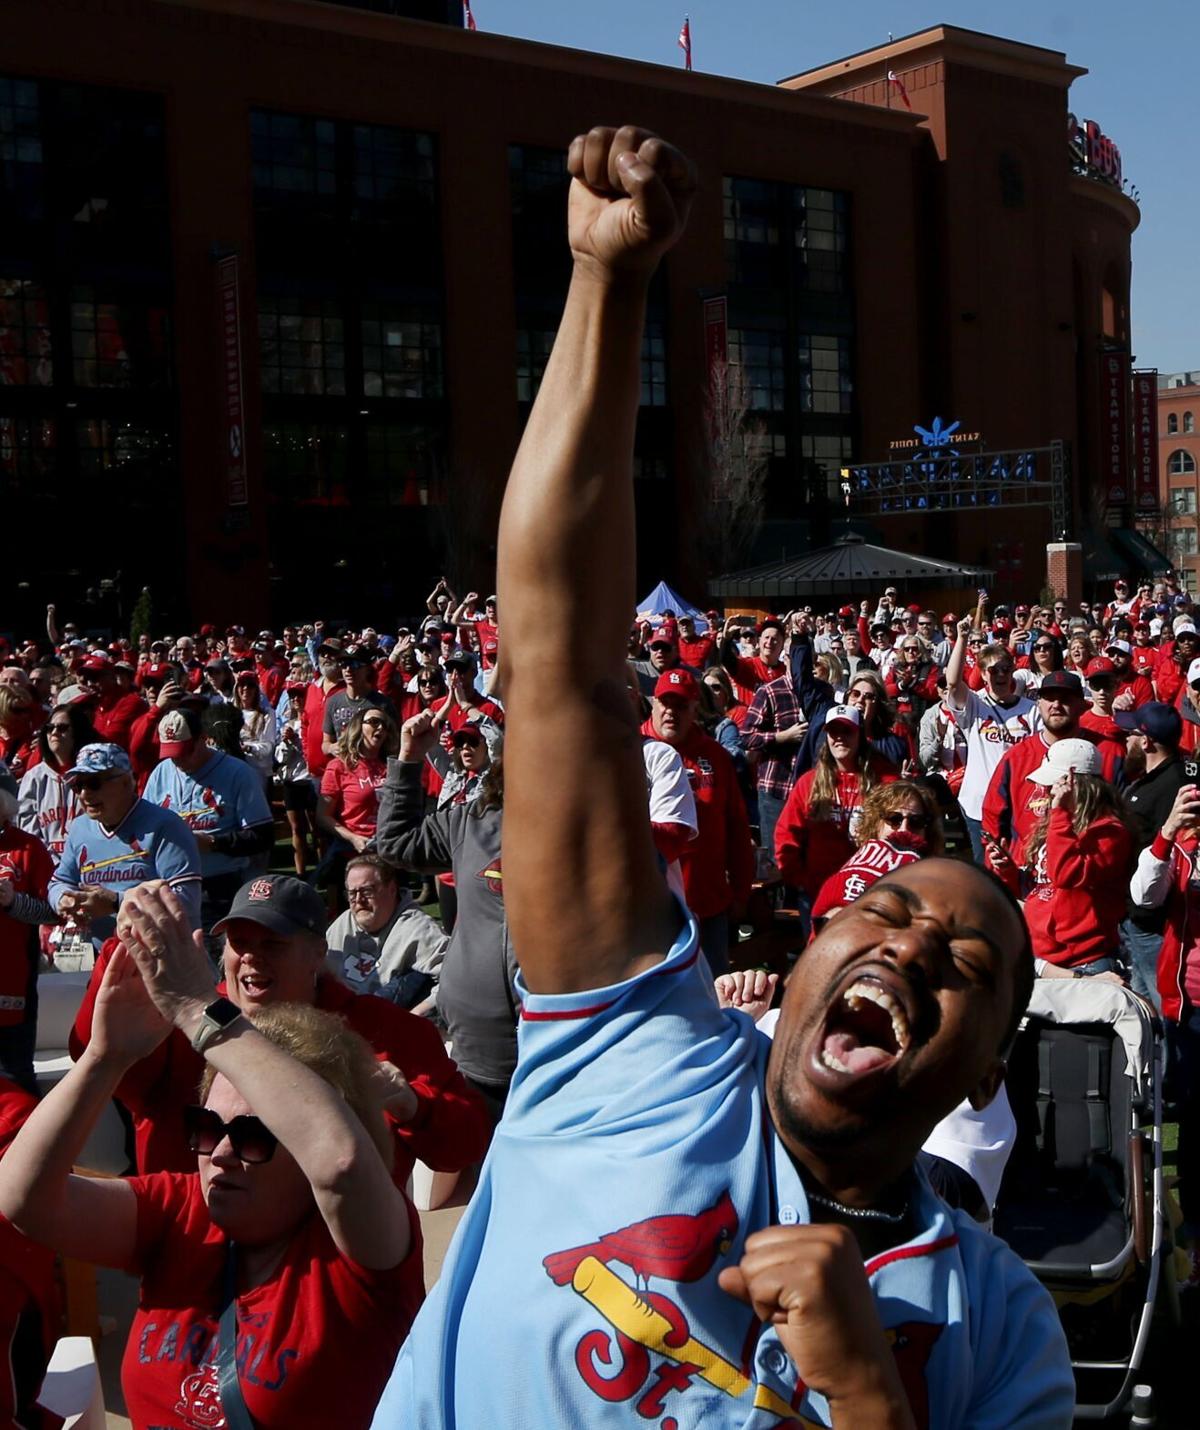 Cardinals will welcome close to 15,000 fans for opener